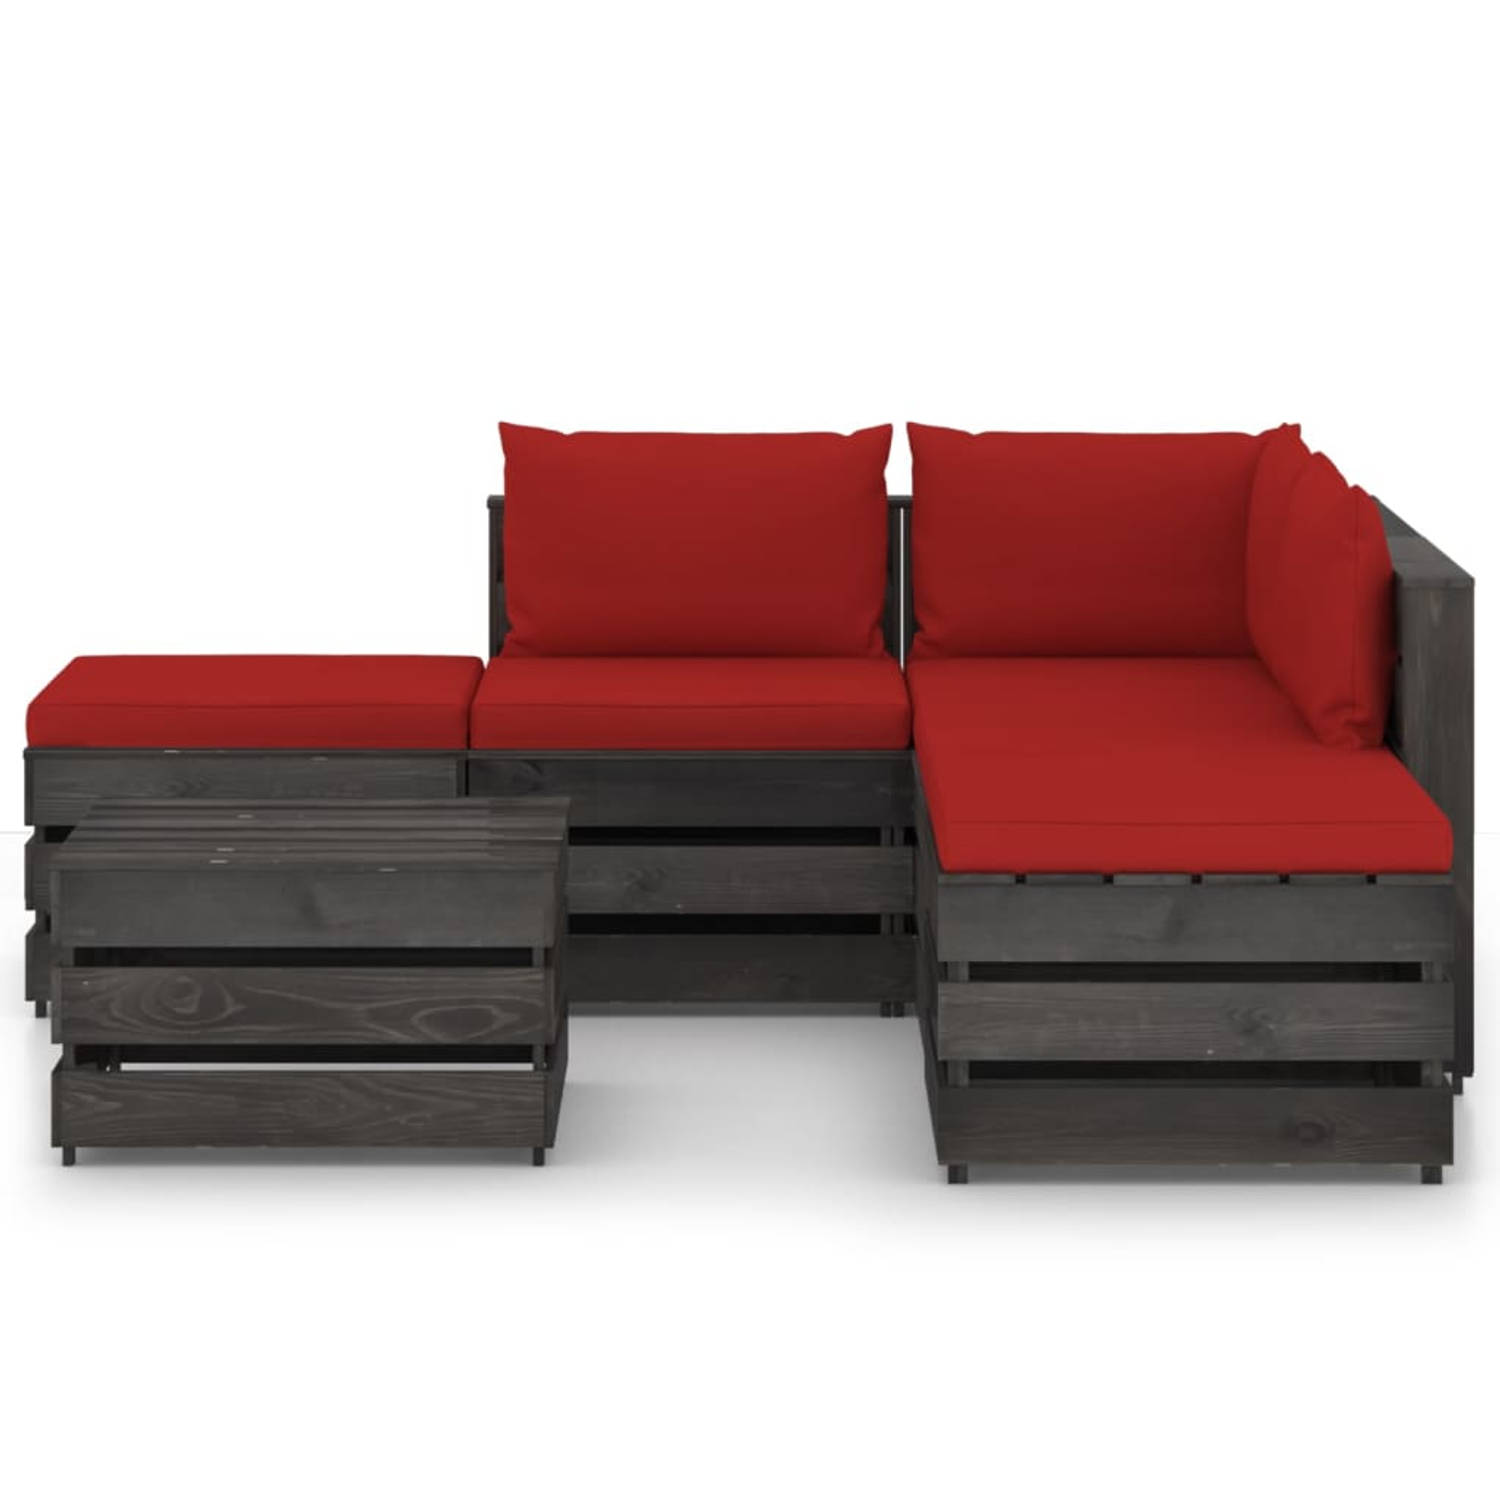 The Living Store Loungeset Pallet - 69x70x66 cm - Rood - Grenenhout